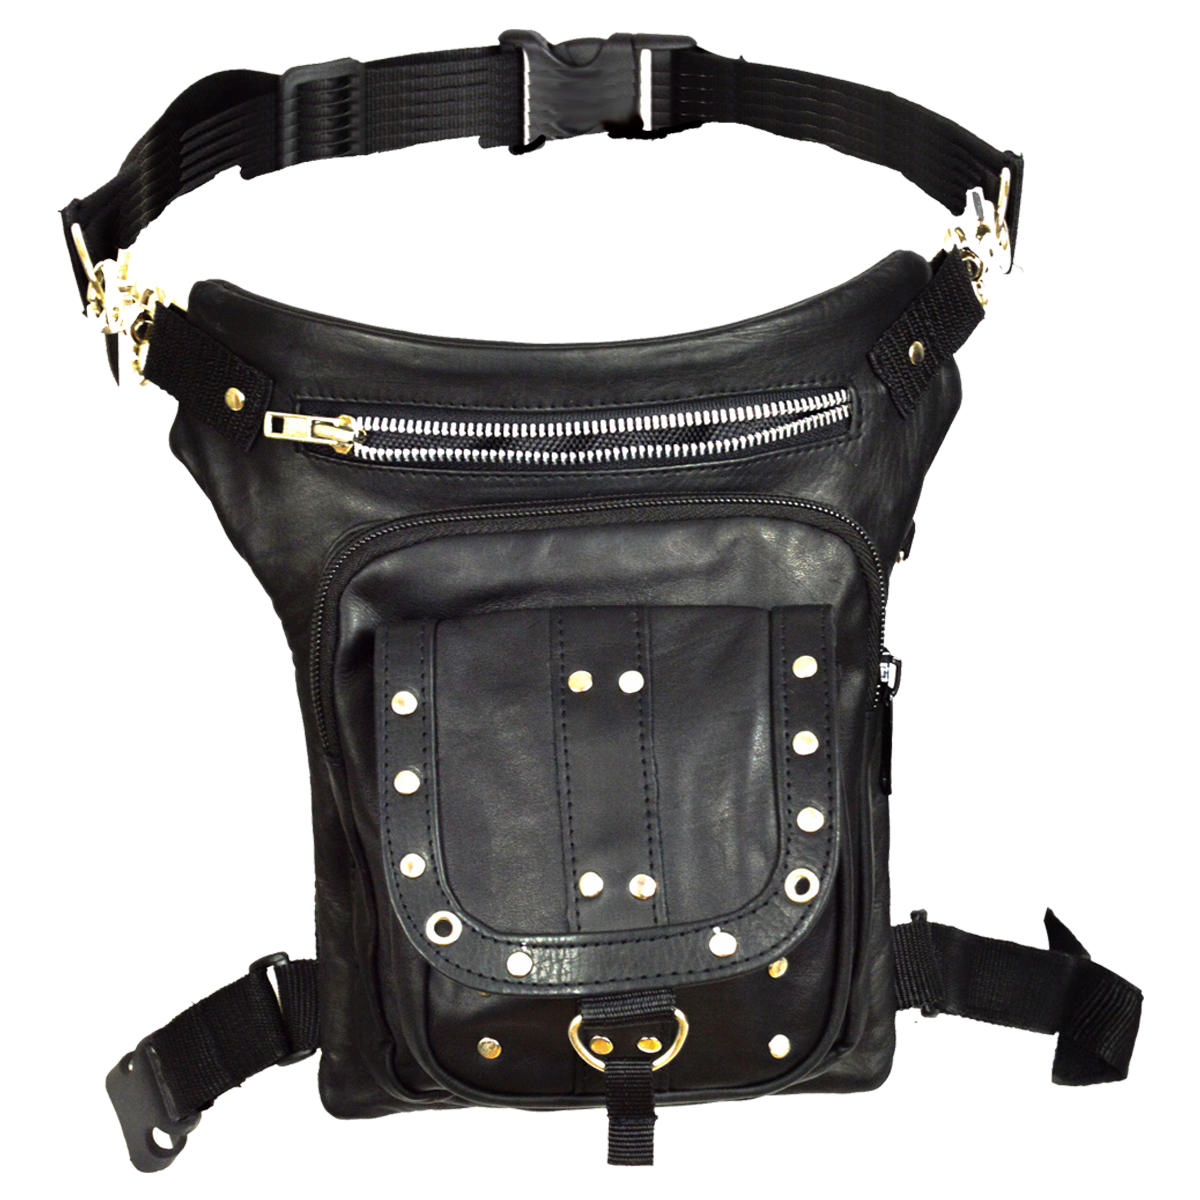 Vance Black Studded Carry Leather Thigh Bag with Waist Belt